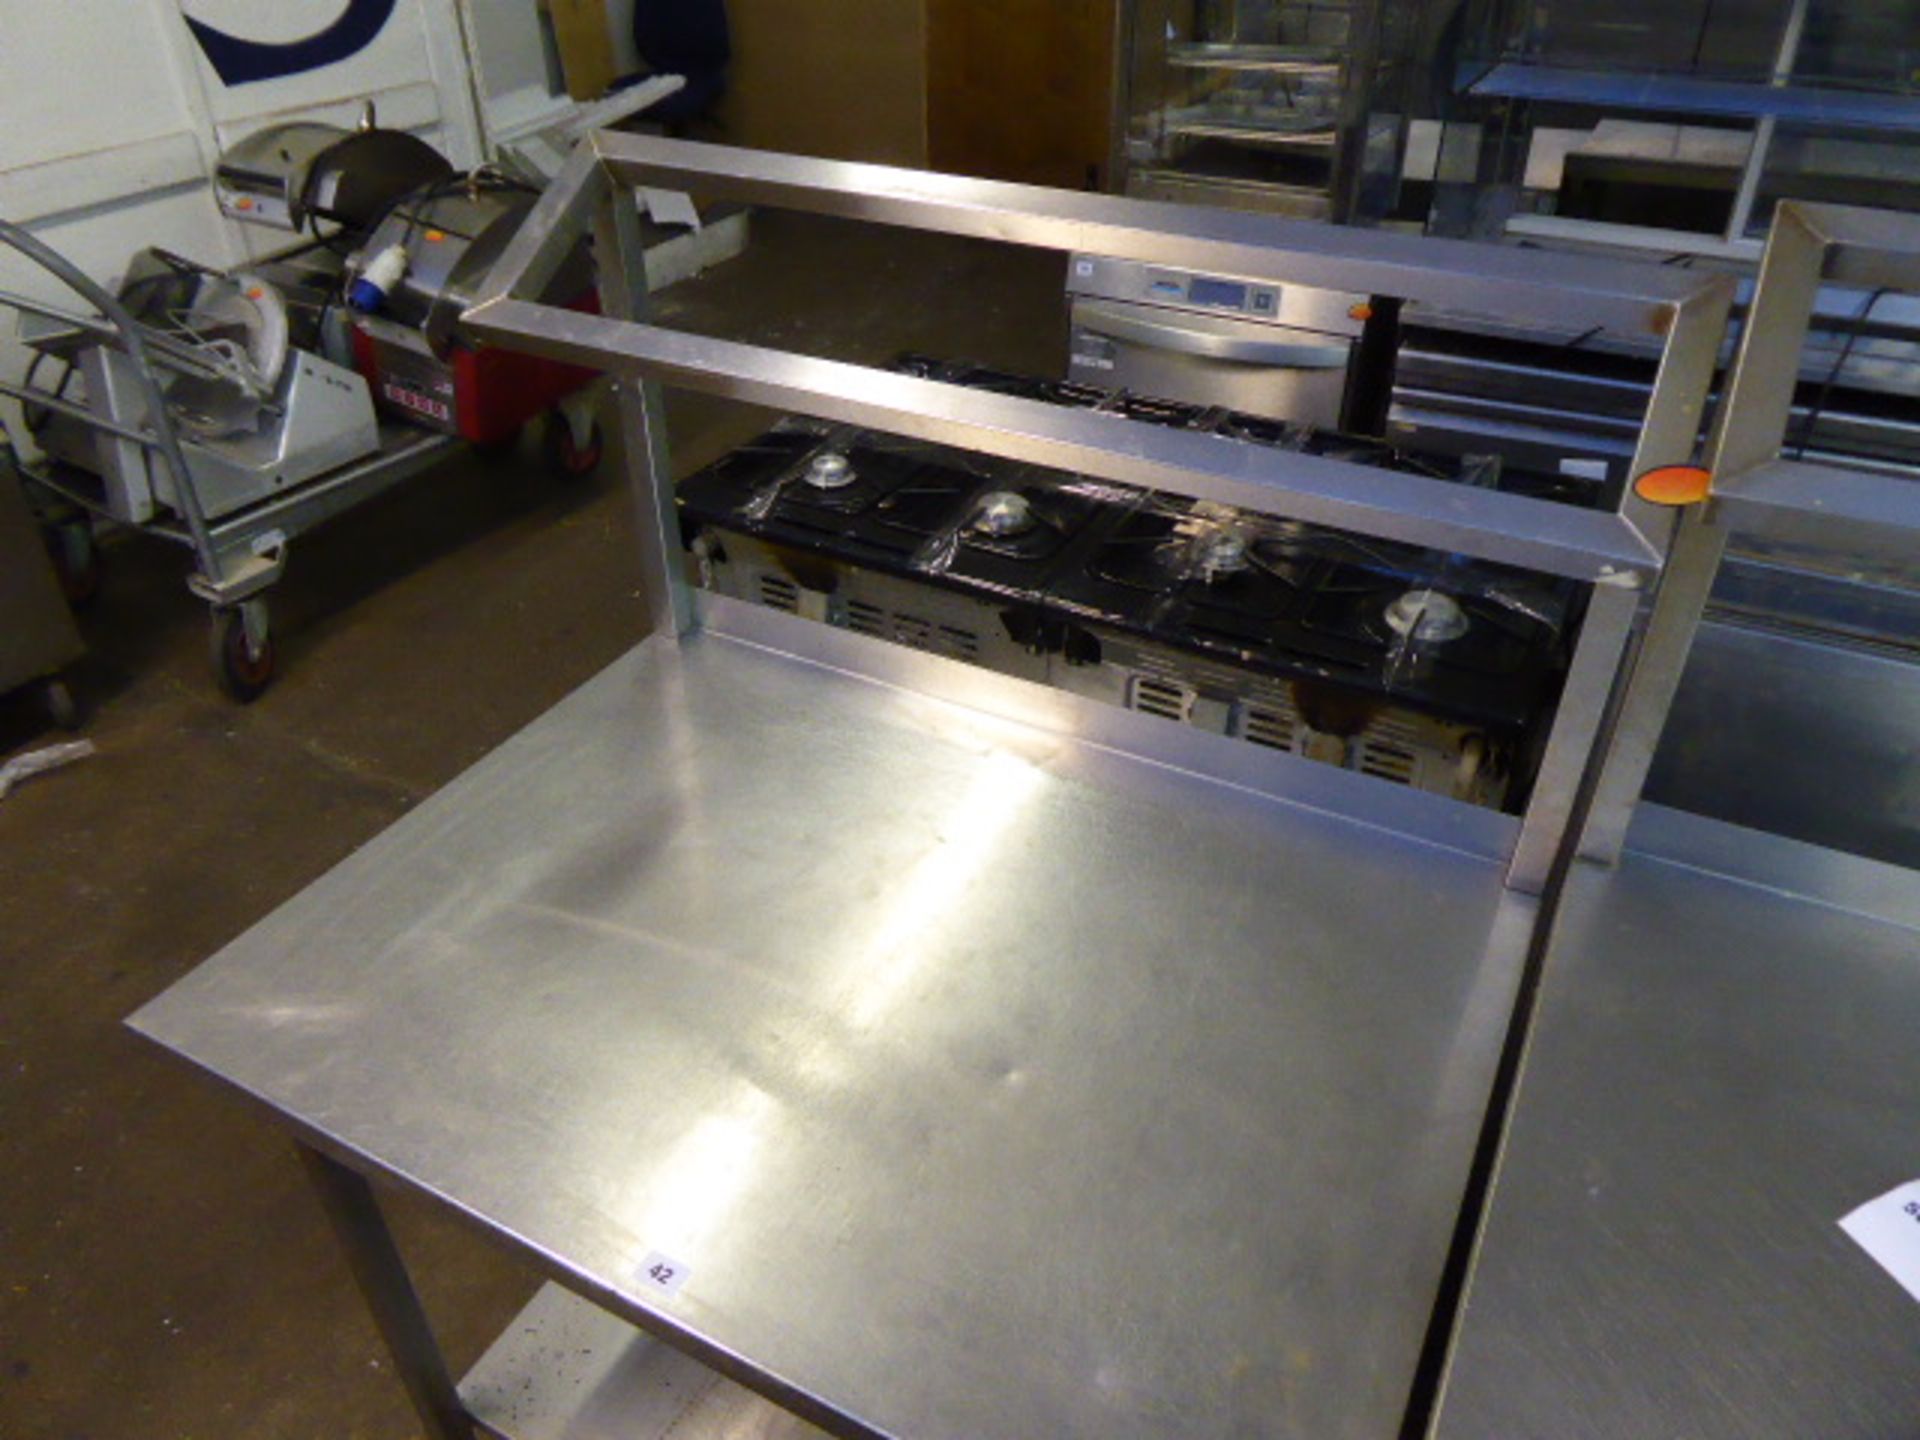 90cm stainless steel preparation table with shelf over and under on castors